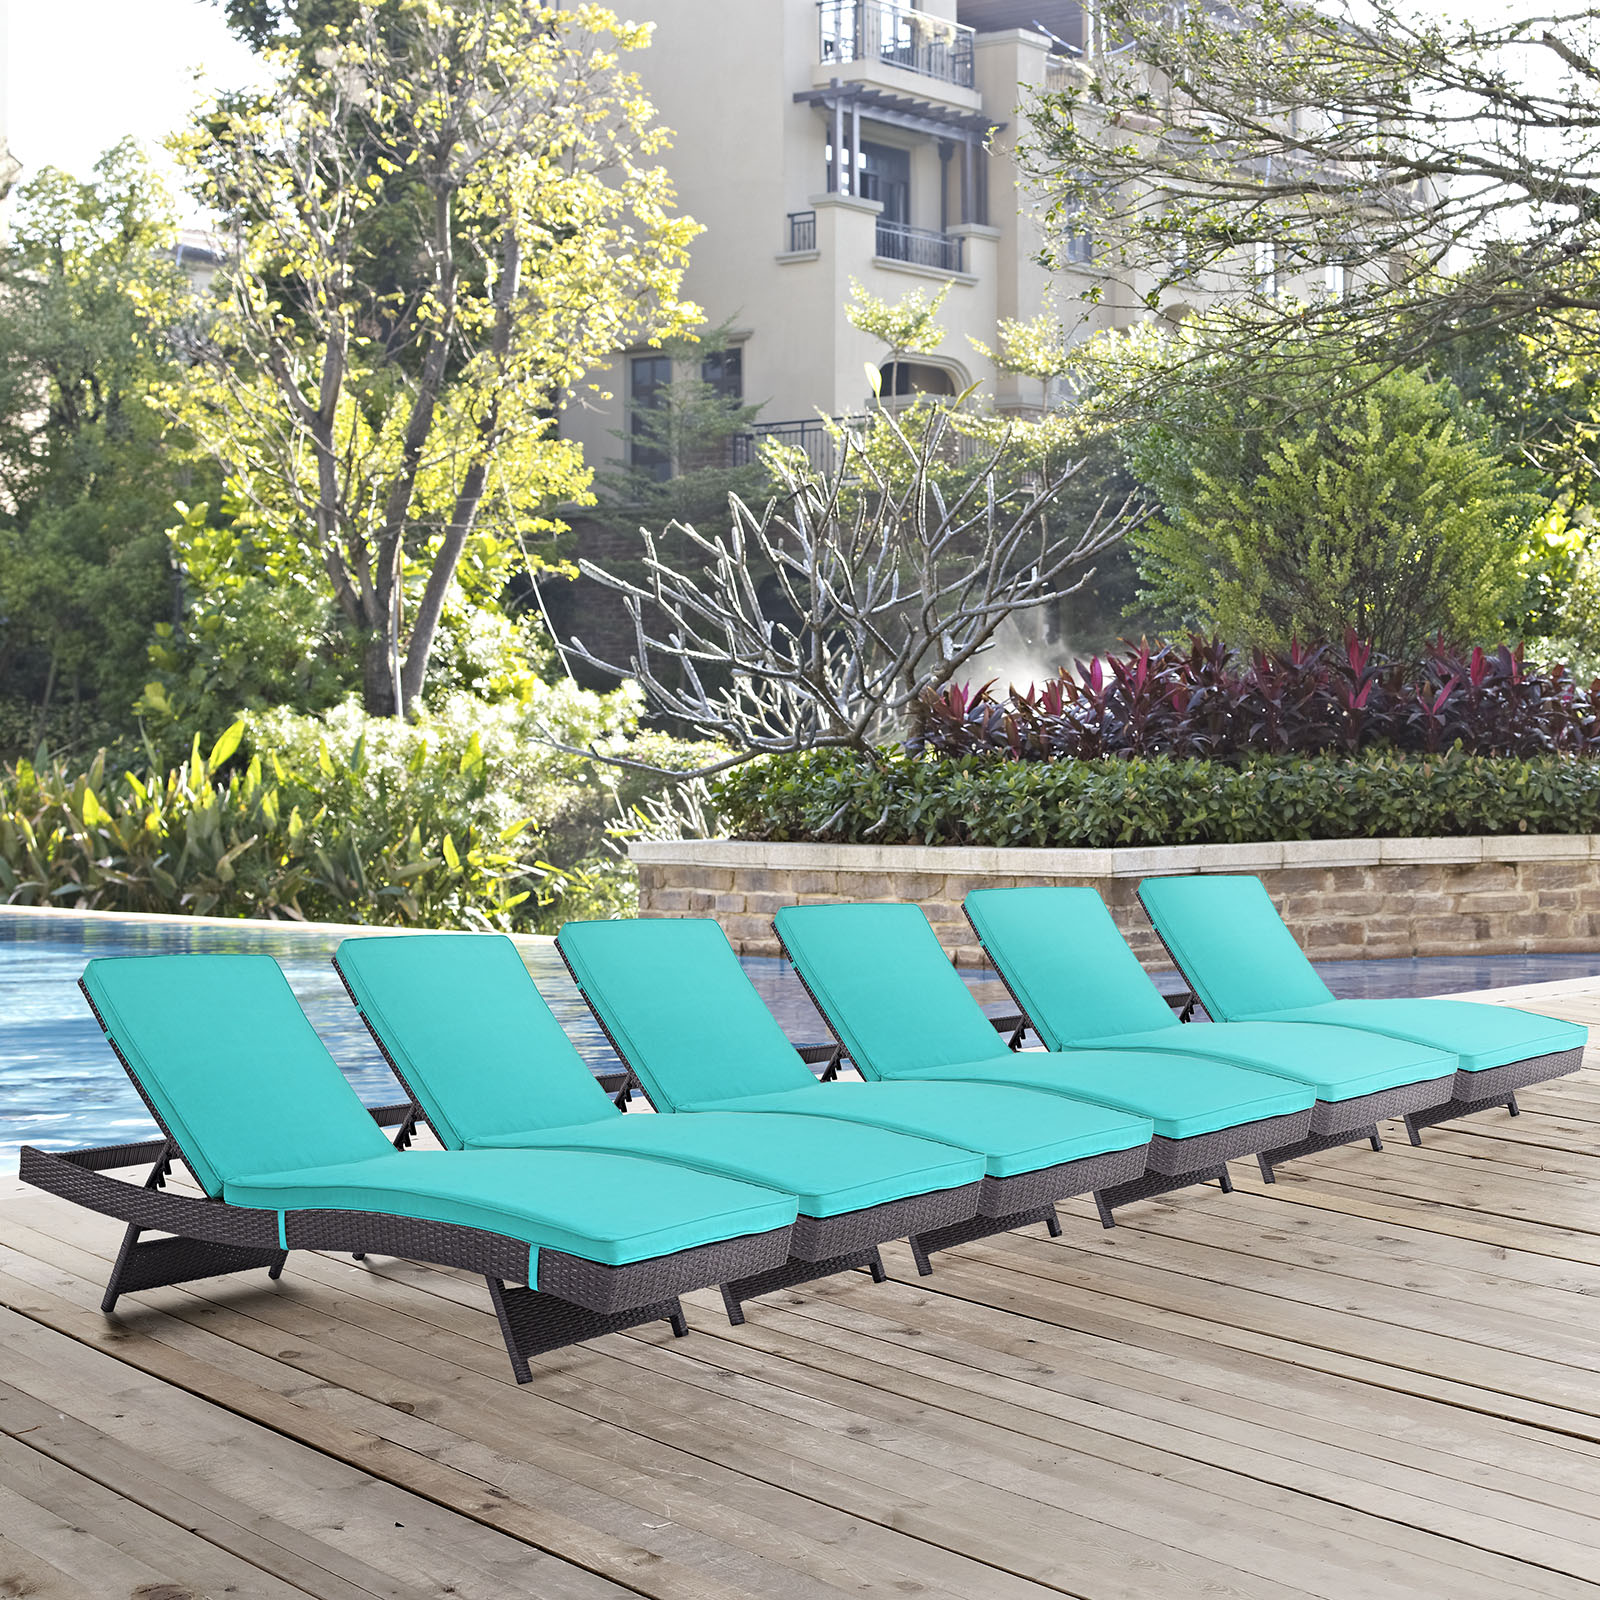 Modway Convene Chaise Outdoor Patio Set of 6 in Espresso Turquoise - image 1 of 5